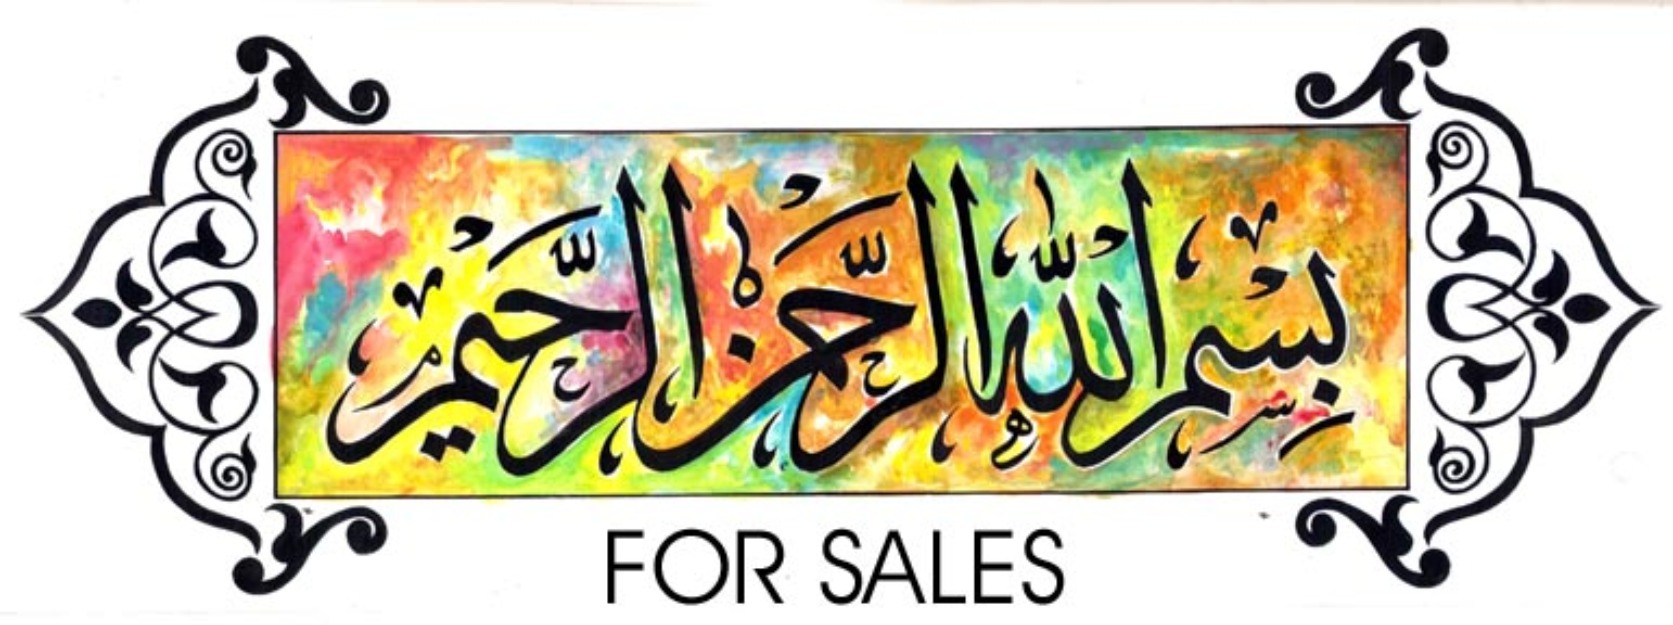 1357134347 468873734 1-Pictures-of--Bismillah-Handmade-Water-Color-Painting 3